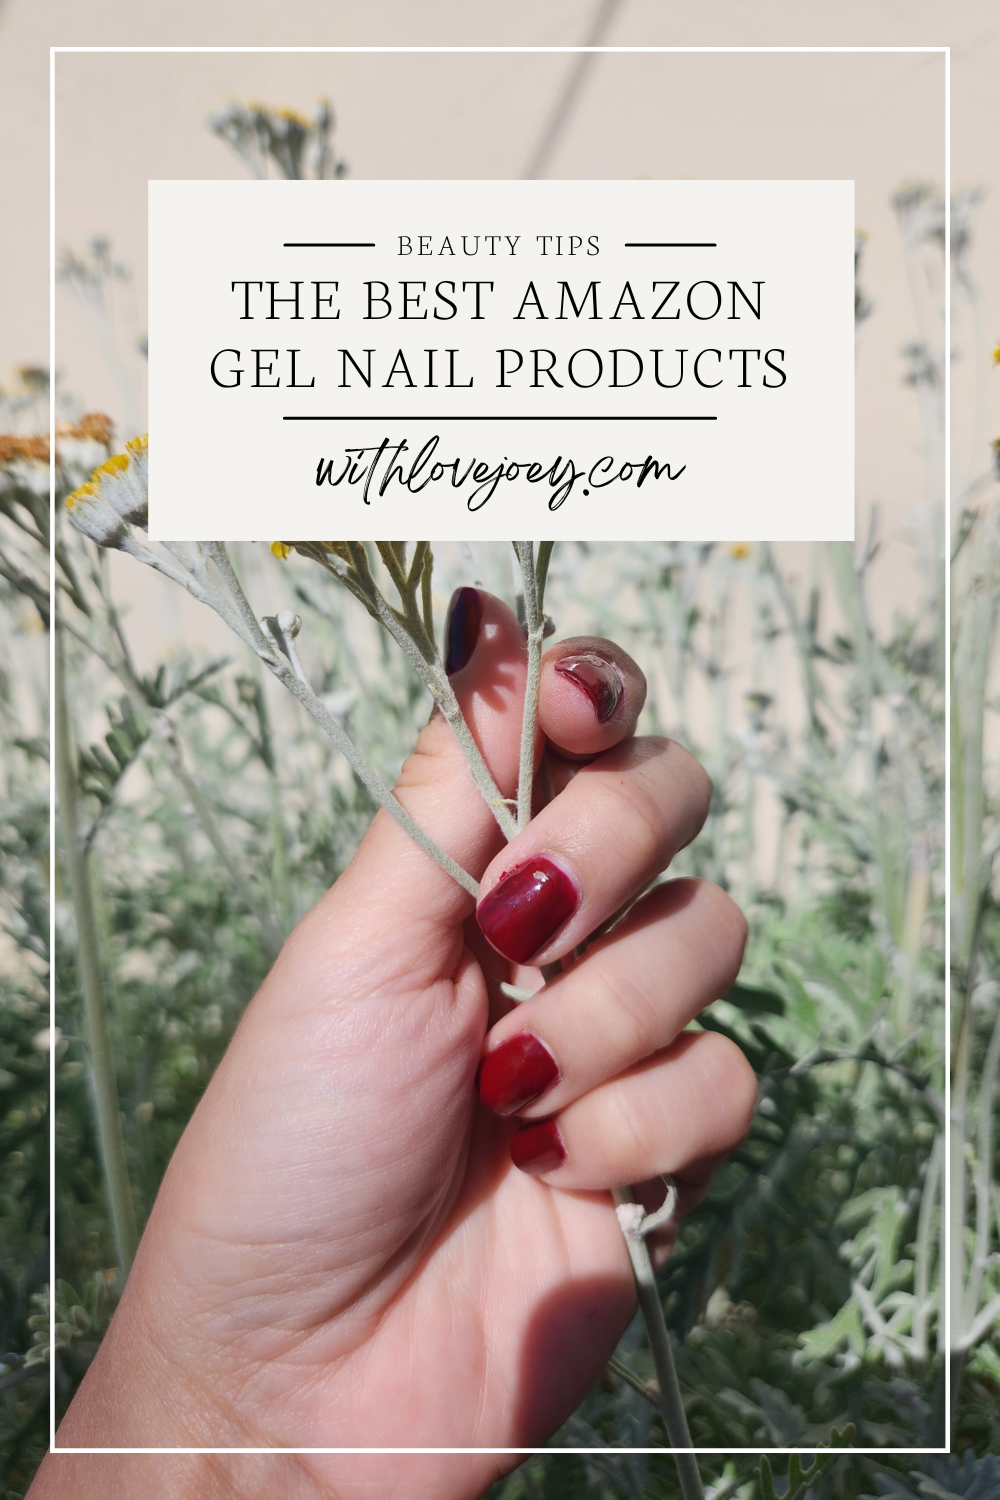 The Best Amazon Gel Nail Products